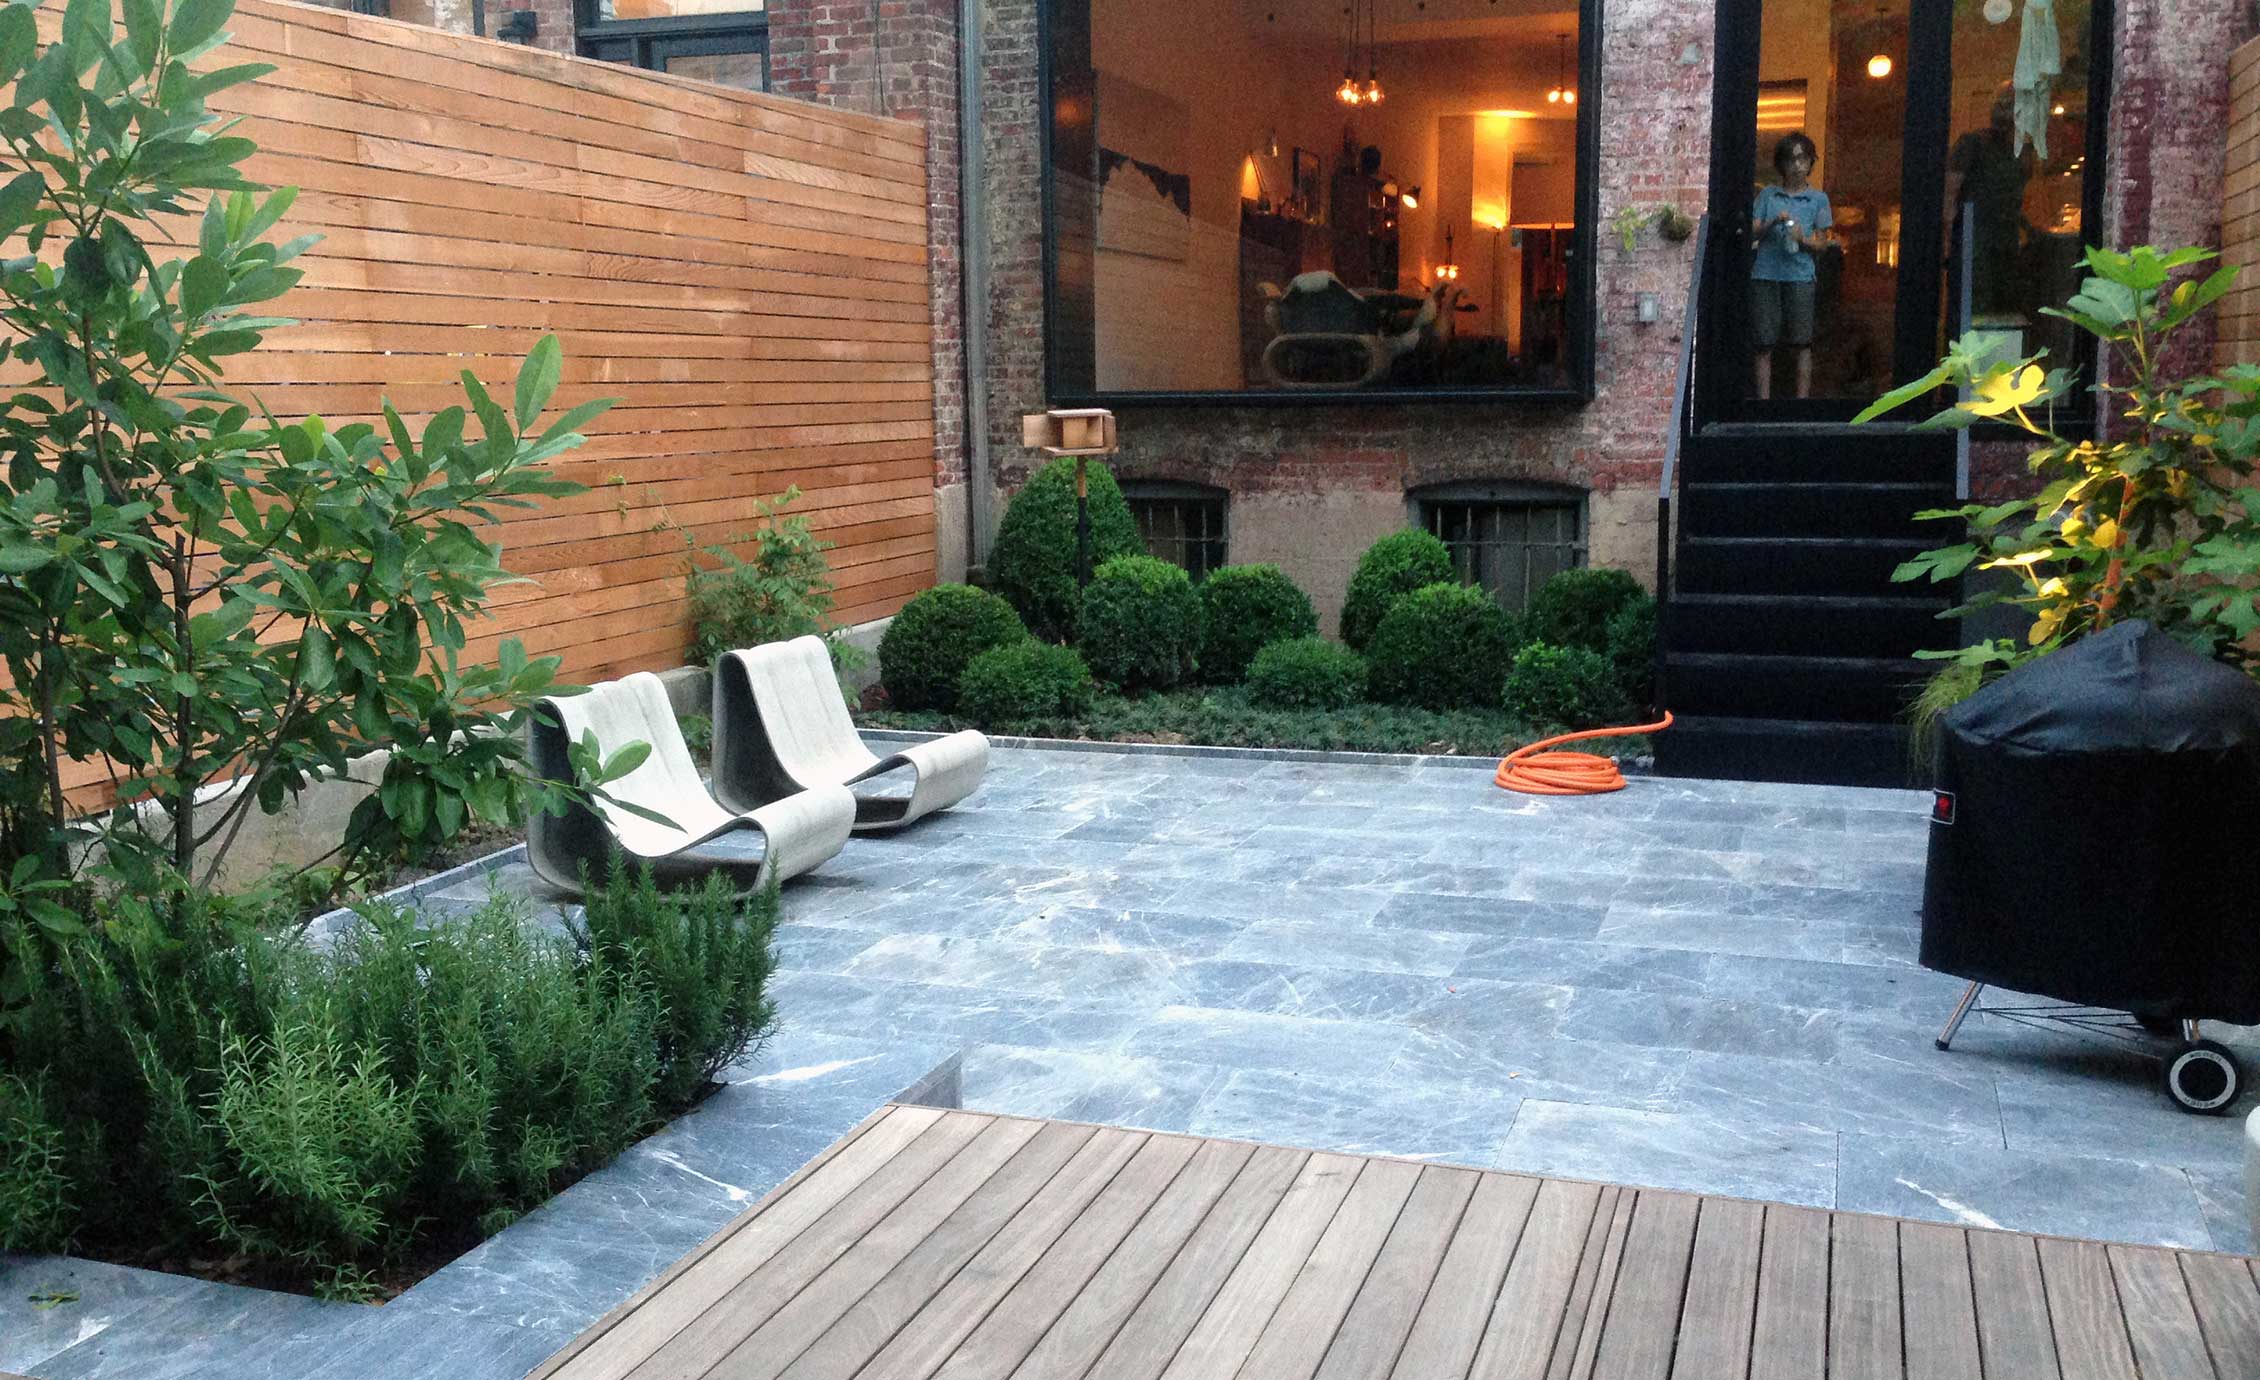 For this Brooklyn townhouse, Klausing surrounded the marble patio with flowering dogwood trees, sculpted boxwoods and mondo grass.